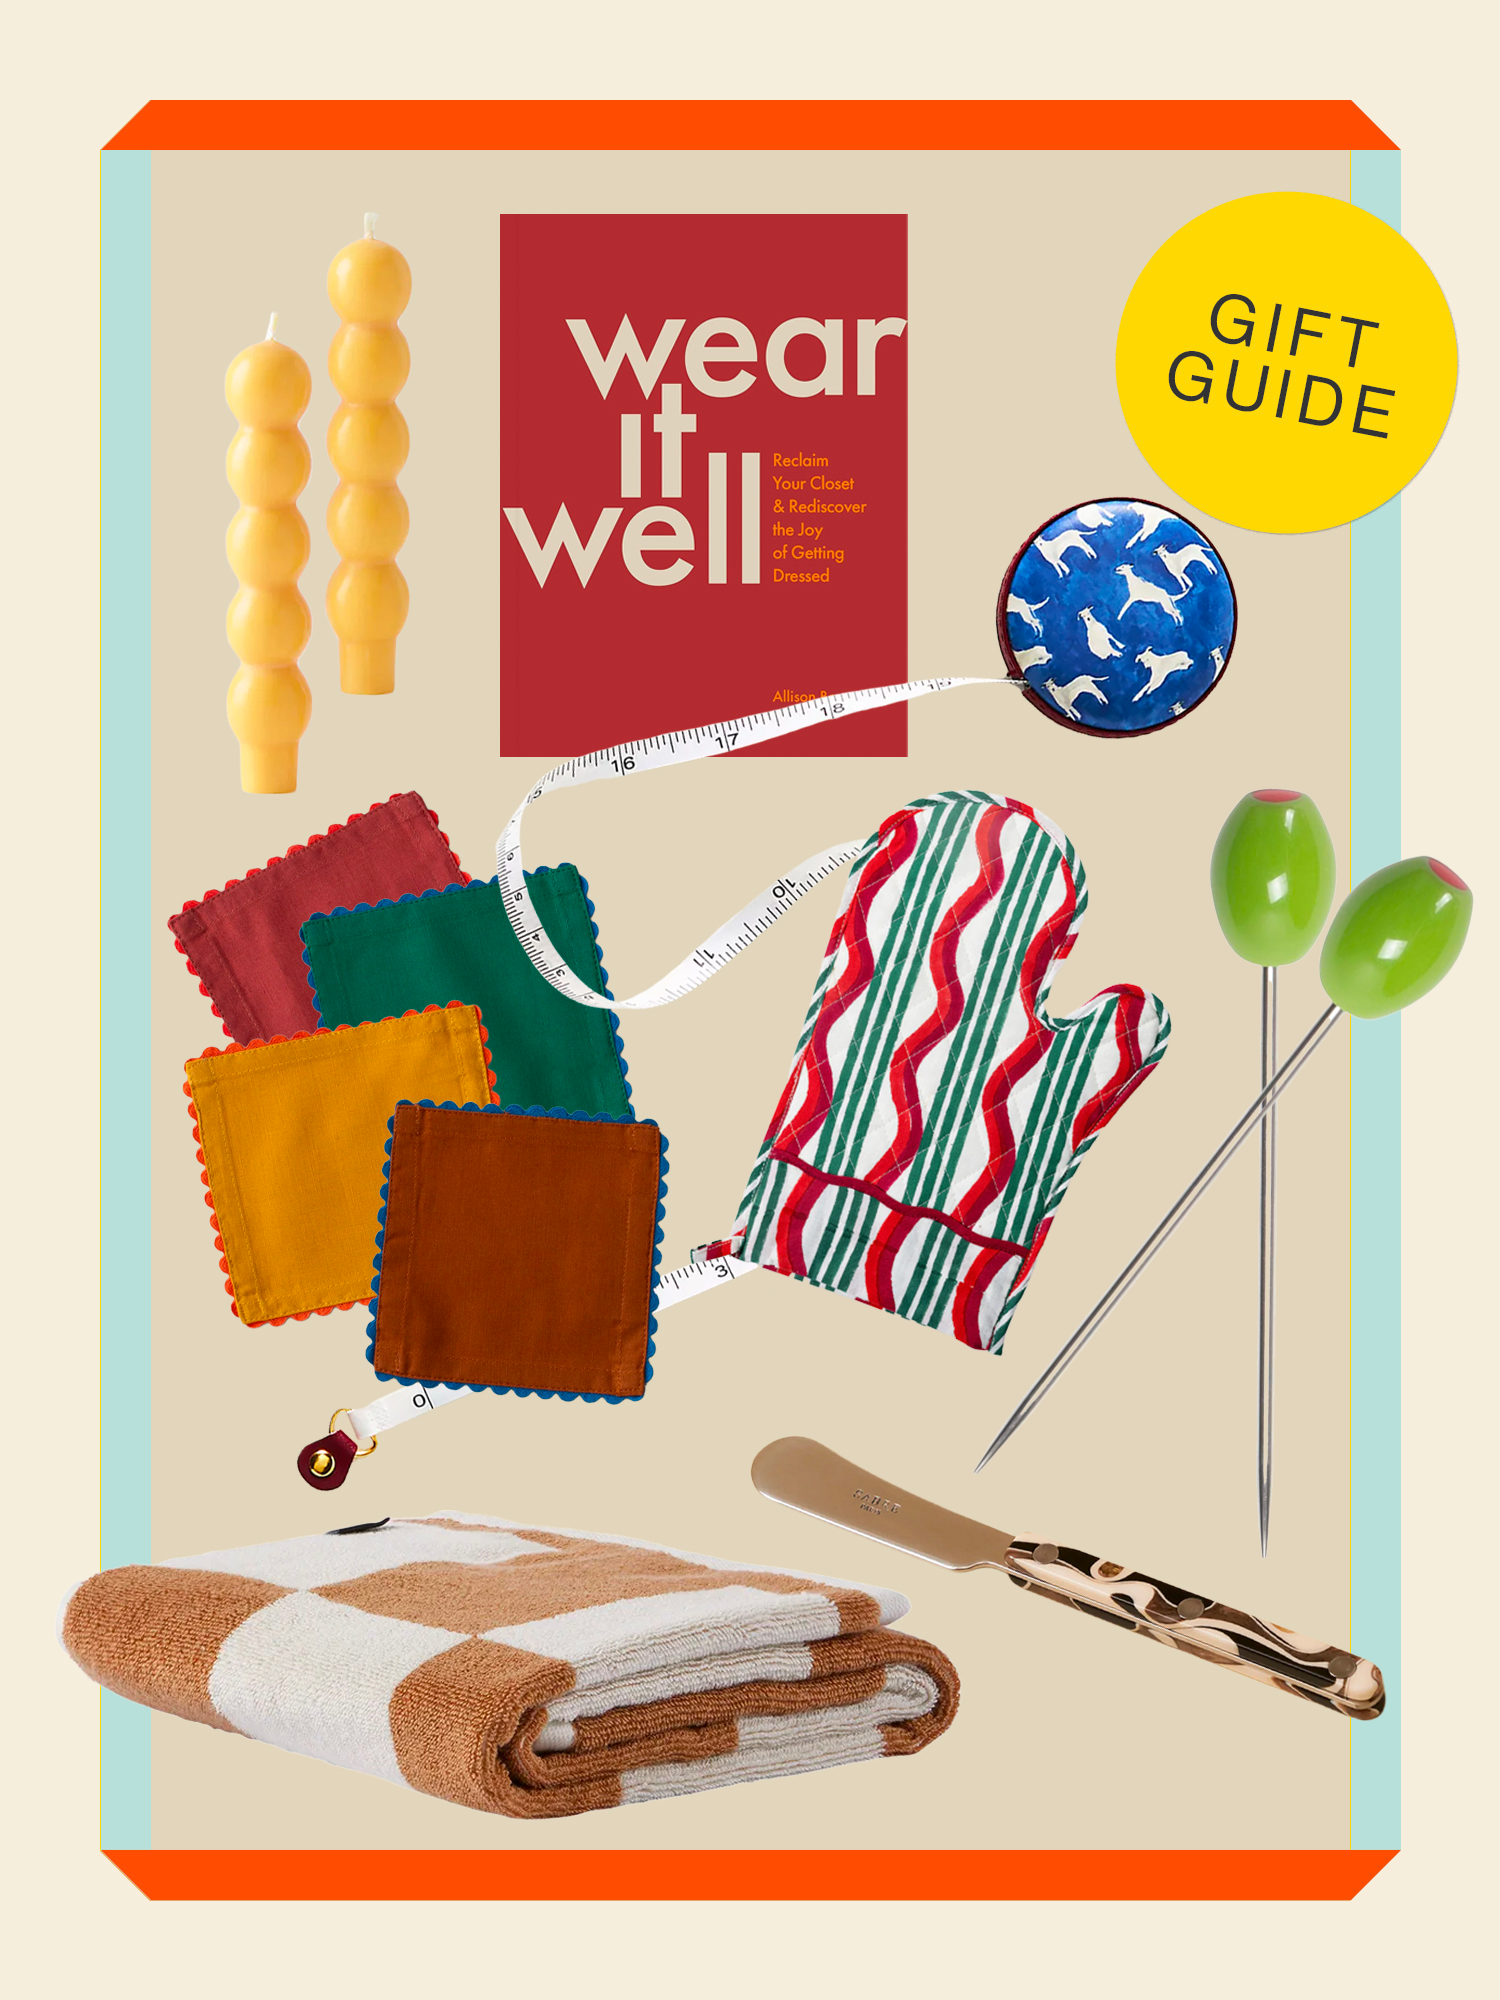 2022 Gift Guide: Gifts $25 & Under - The GR Guide